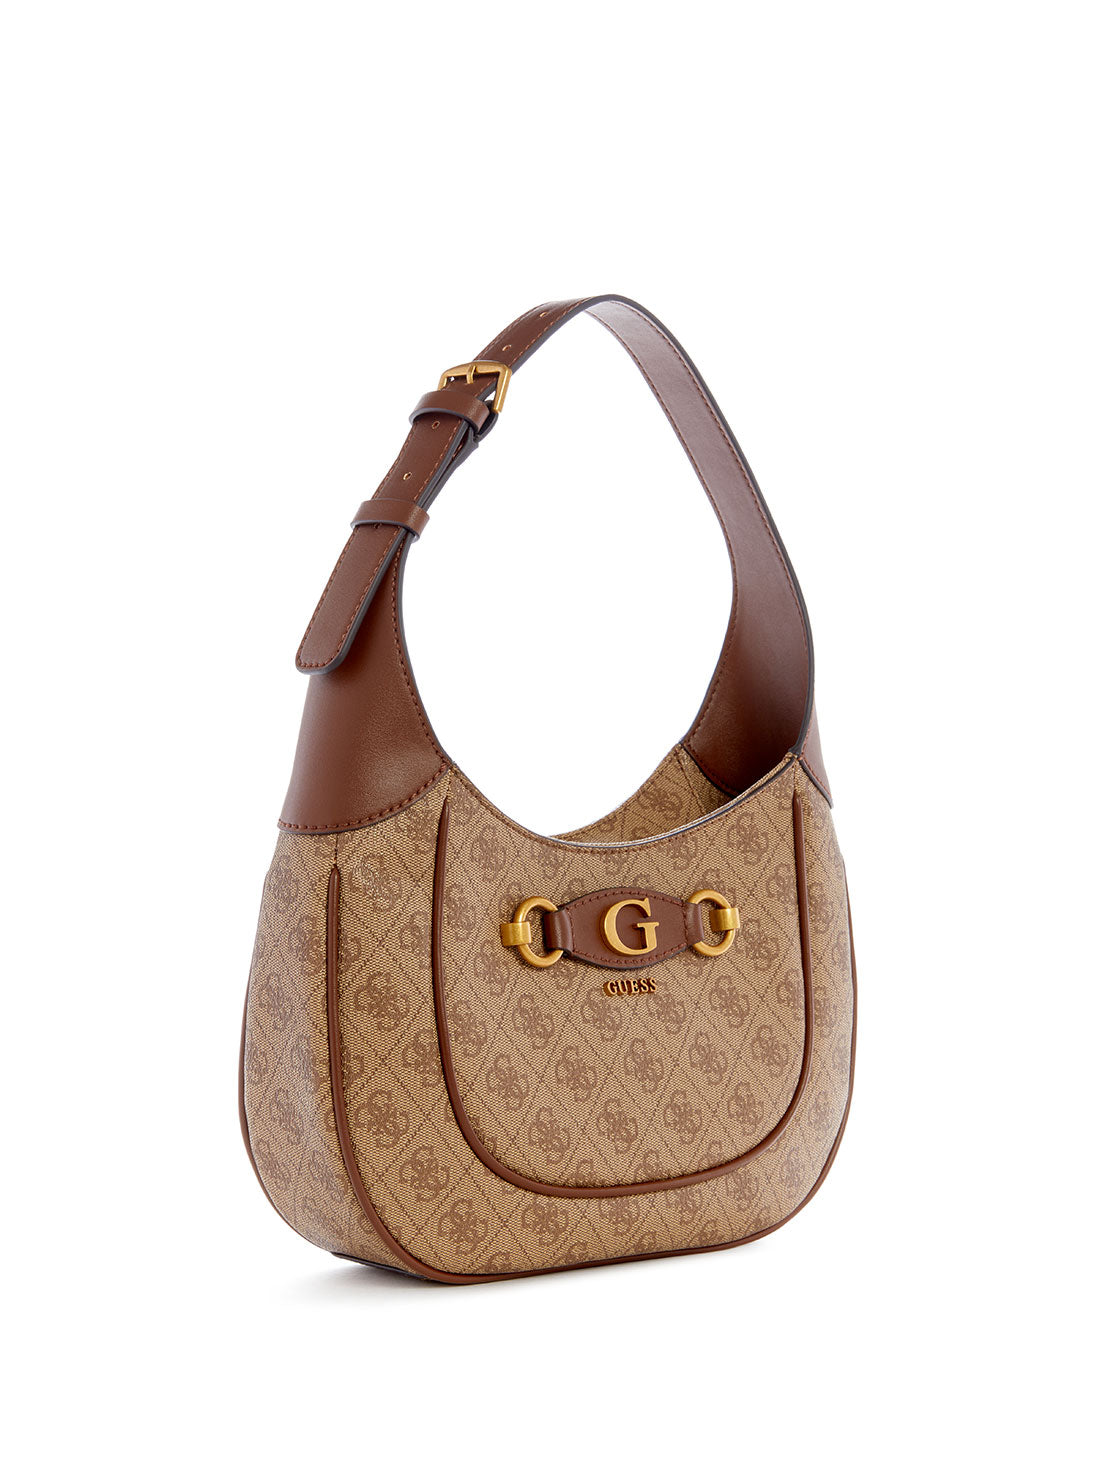 GUESS Women's Brown Logo Izzy Hobo Bag SB865402 Front Side View